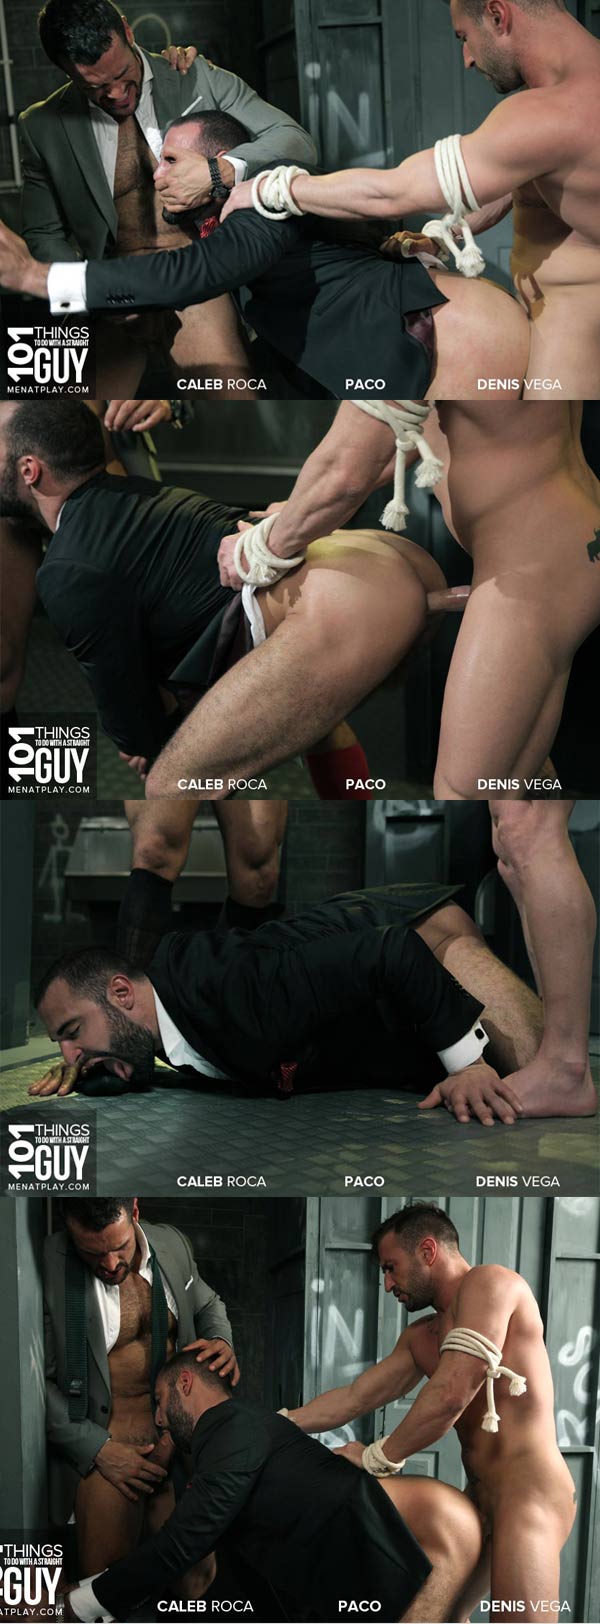 101 Things To Do With A Straight Guy: Tie Him Up (Denis Vega, Paco & Caleb Roca) on MenAtPlay